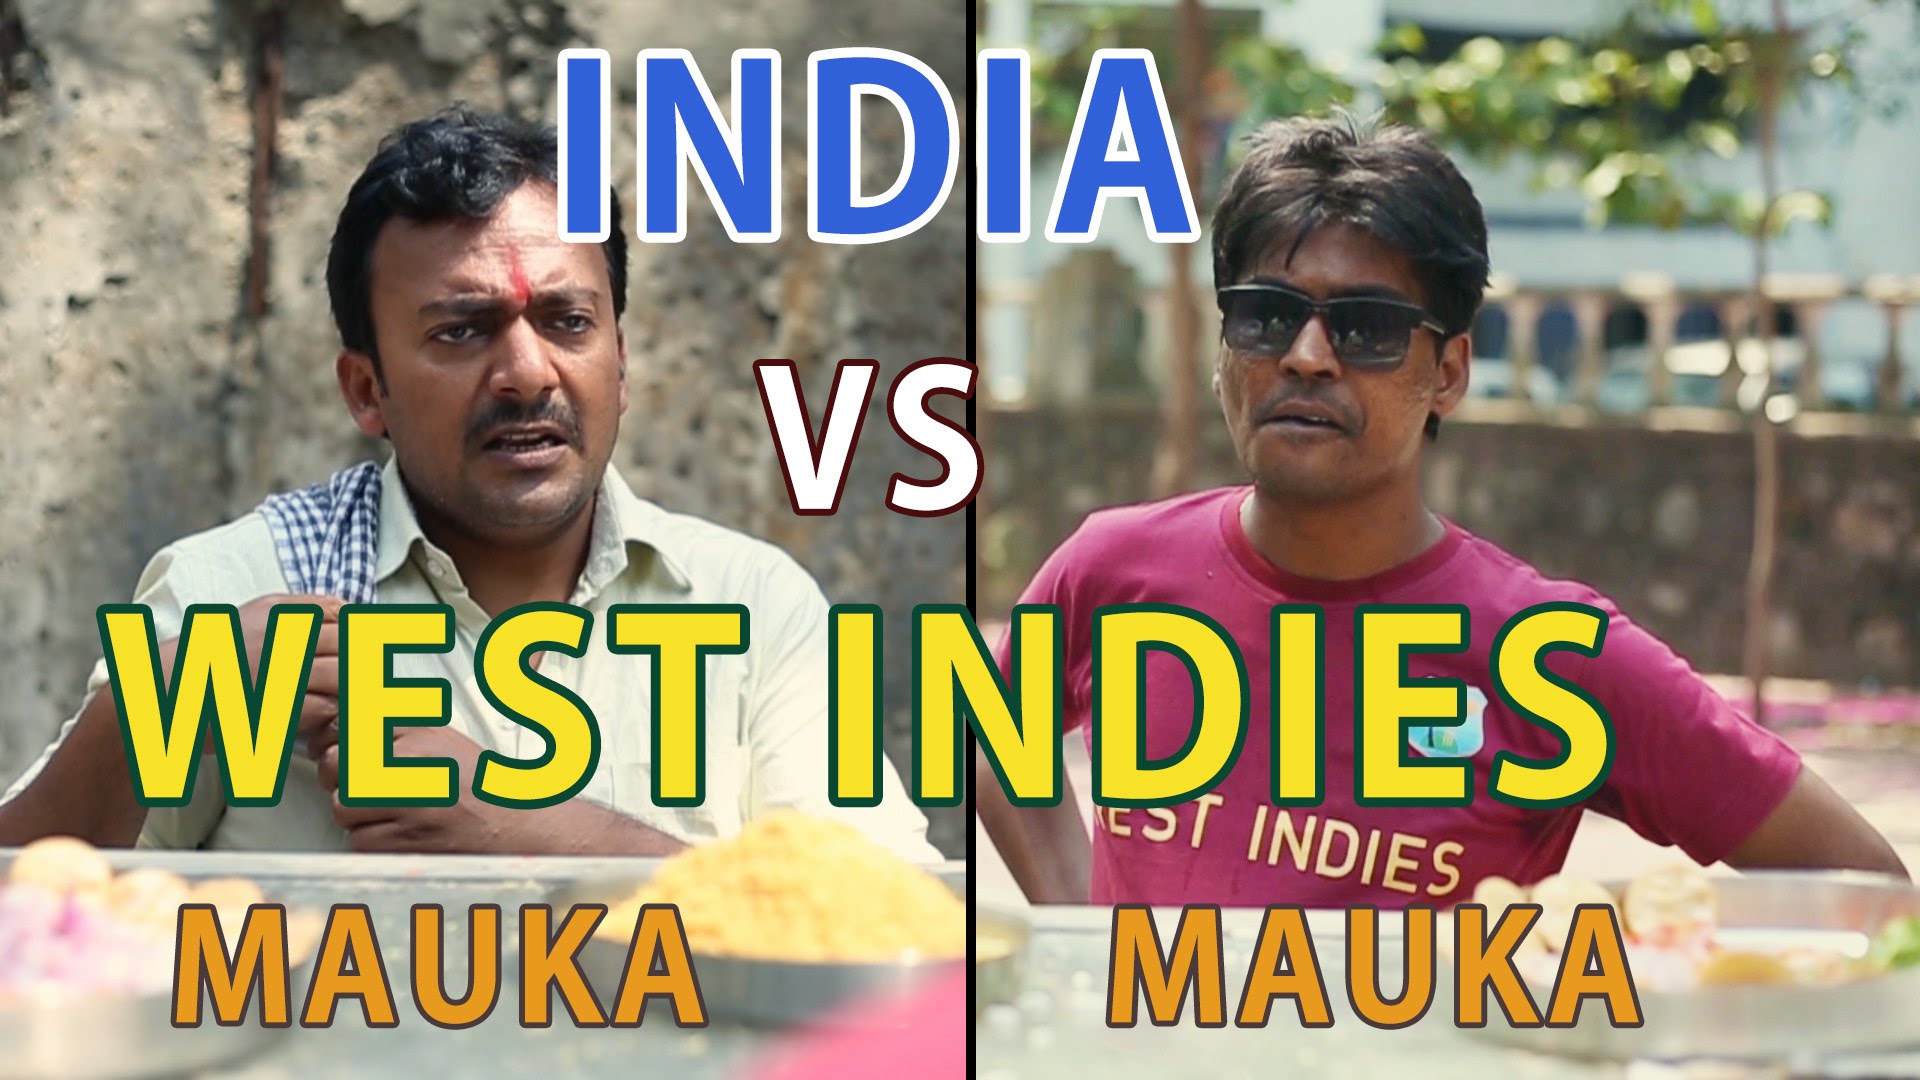 Watch: Mumbai gets ready for the Gayle storm in the new Mauka-Mauka video